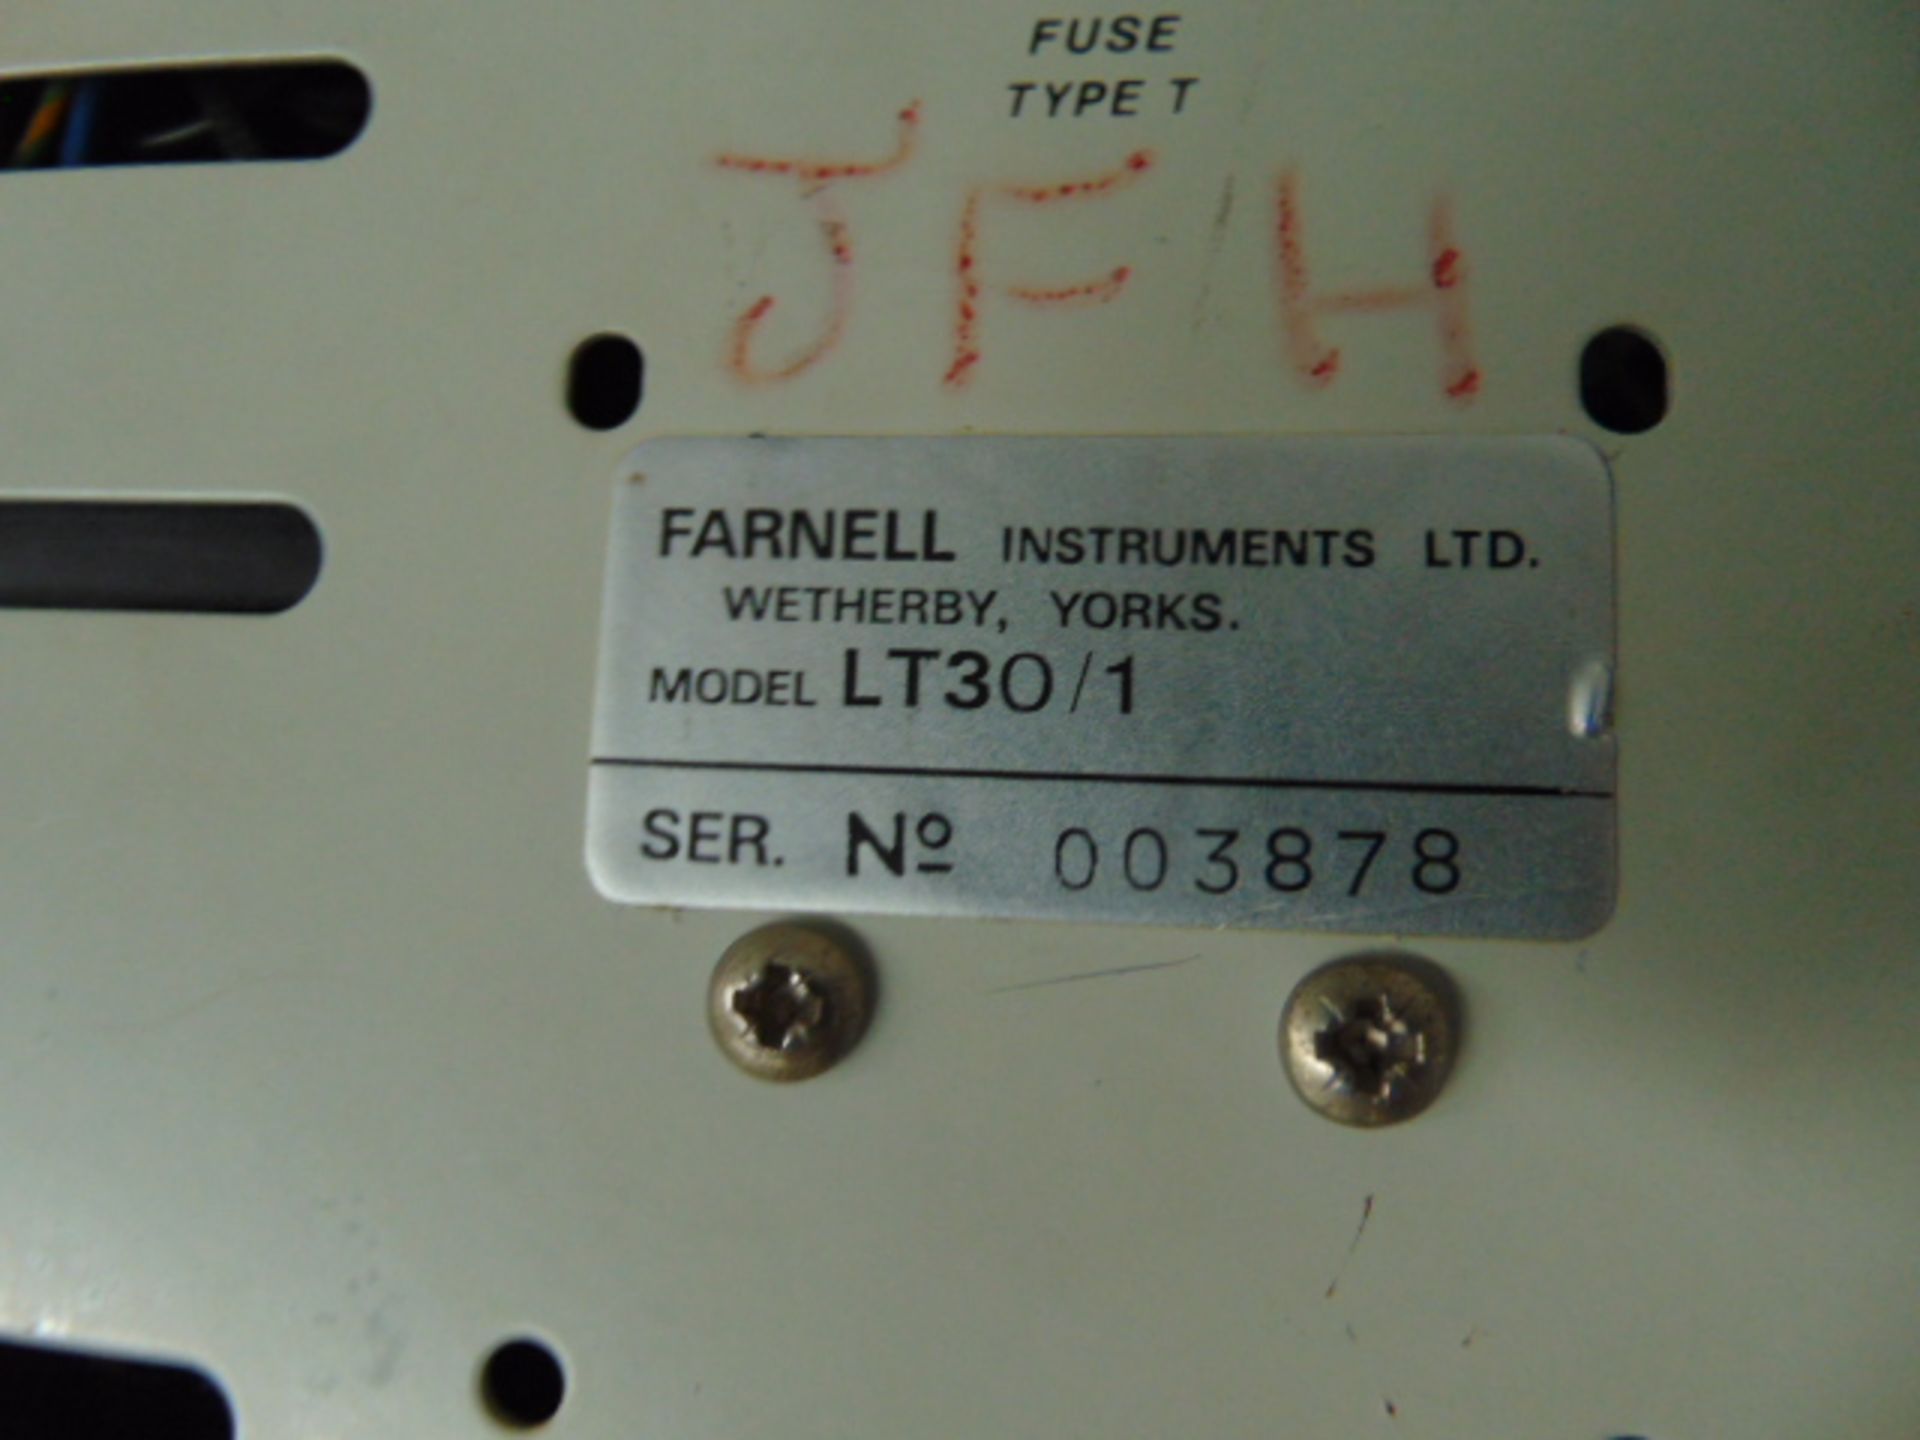 You are bidding on a Farnell LT30-1 Stabilised Power Supply. This Farnell Stabilised Power Supply - Image 5 of 5